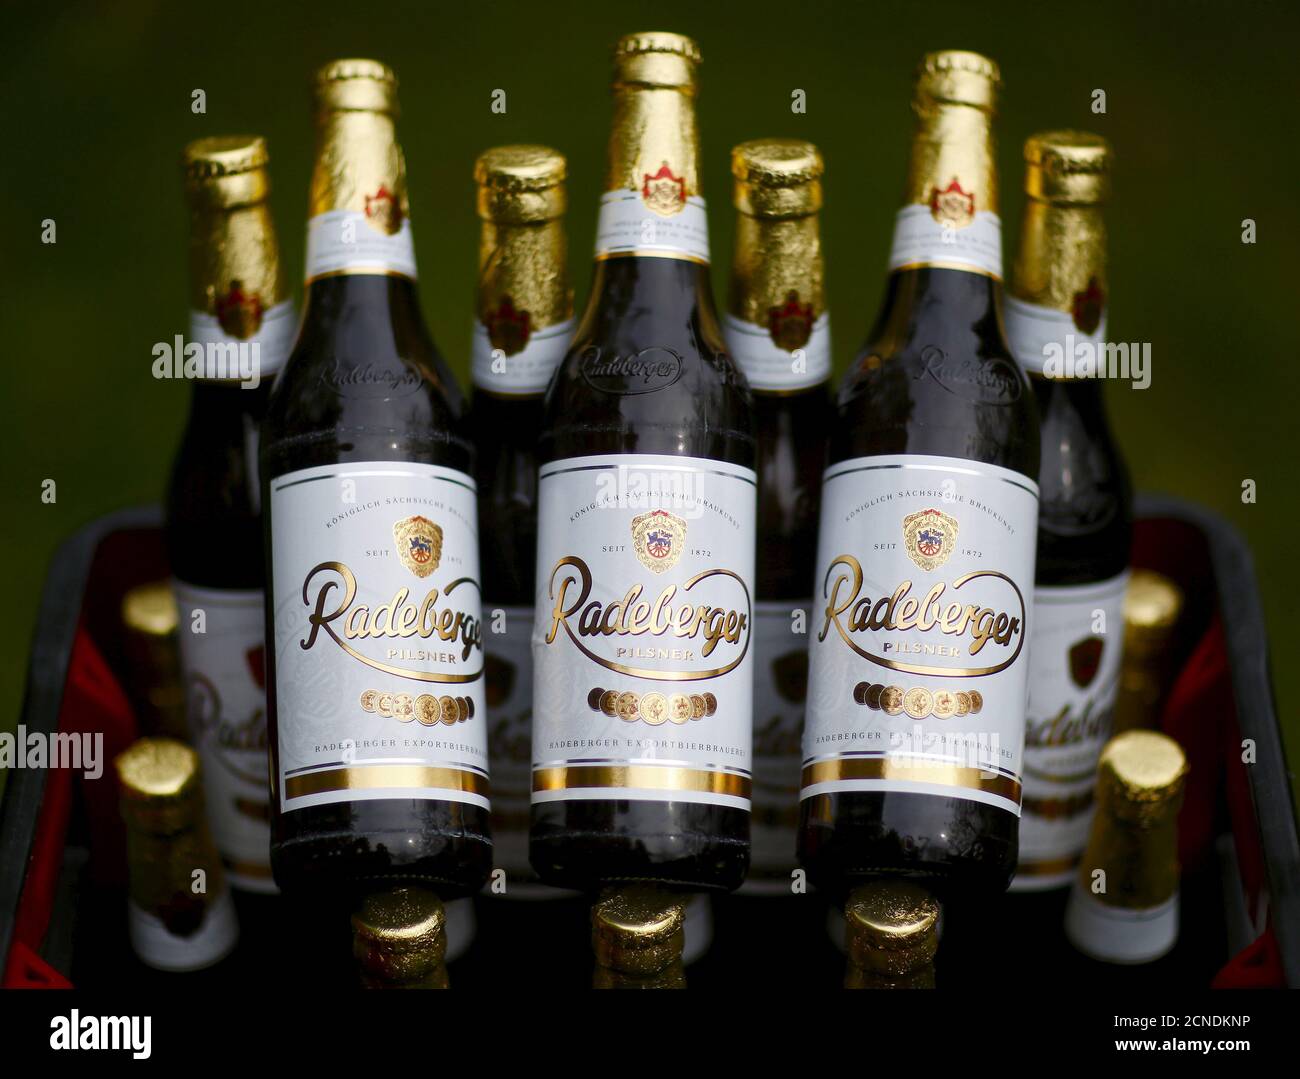 Radeberger Beer High Resolution Stock Photography and Images - Alamy